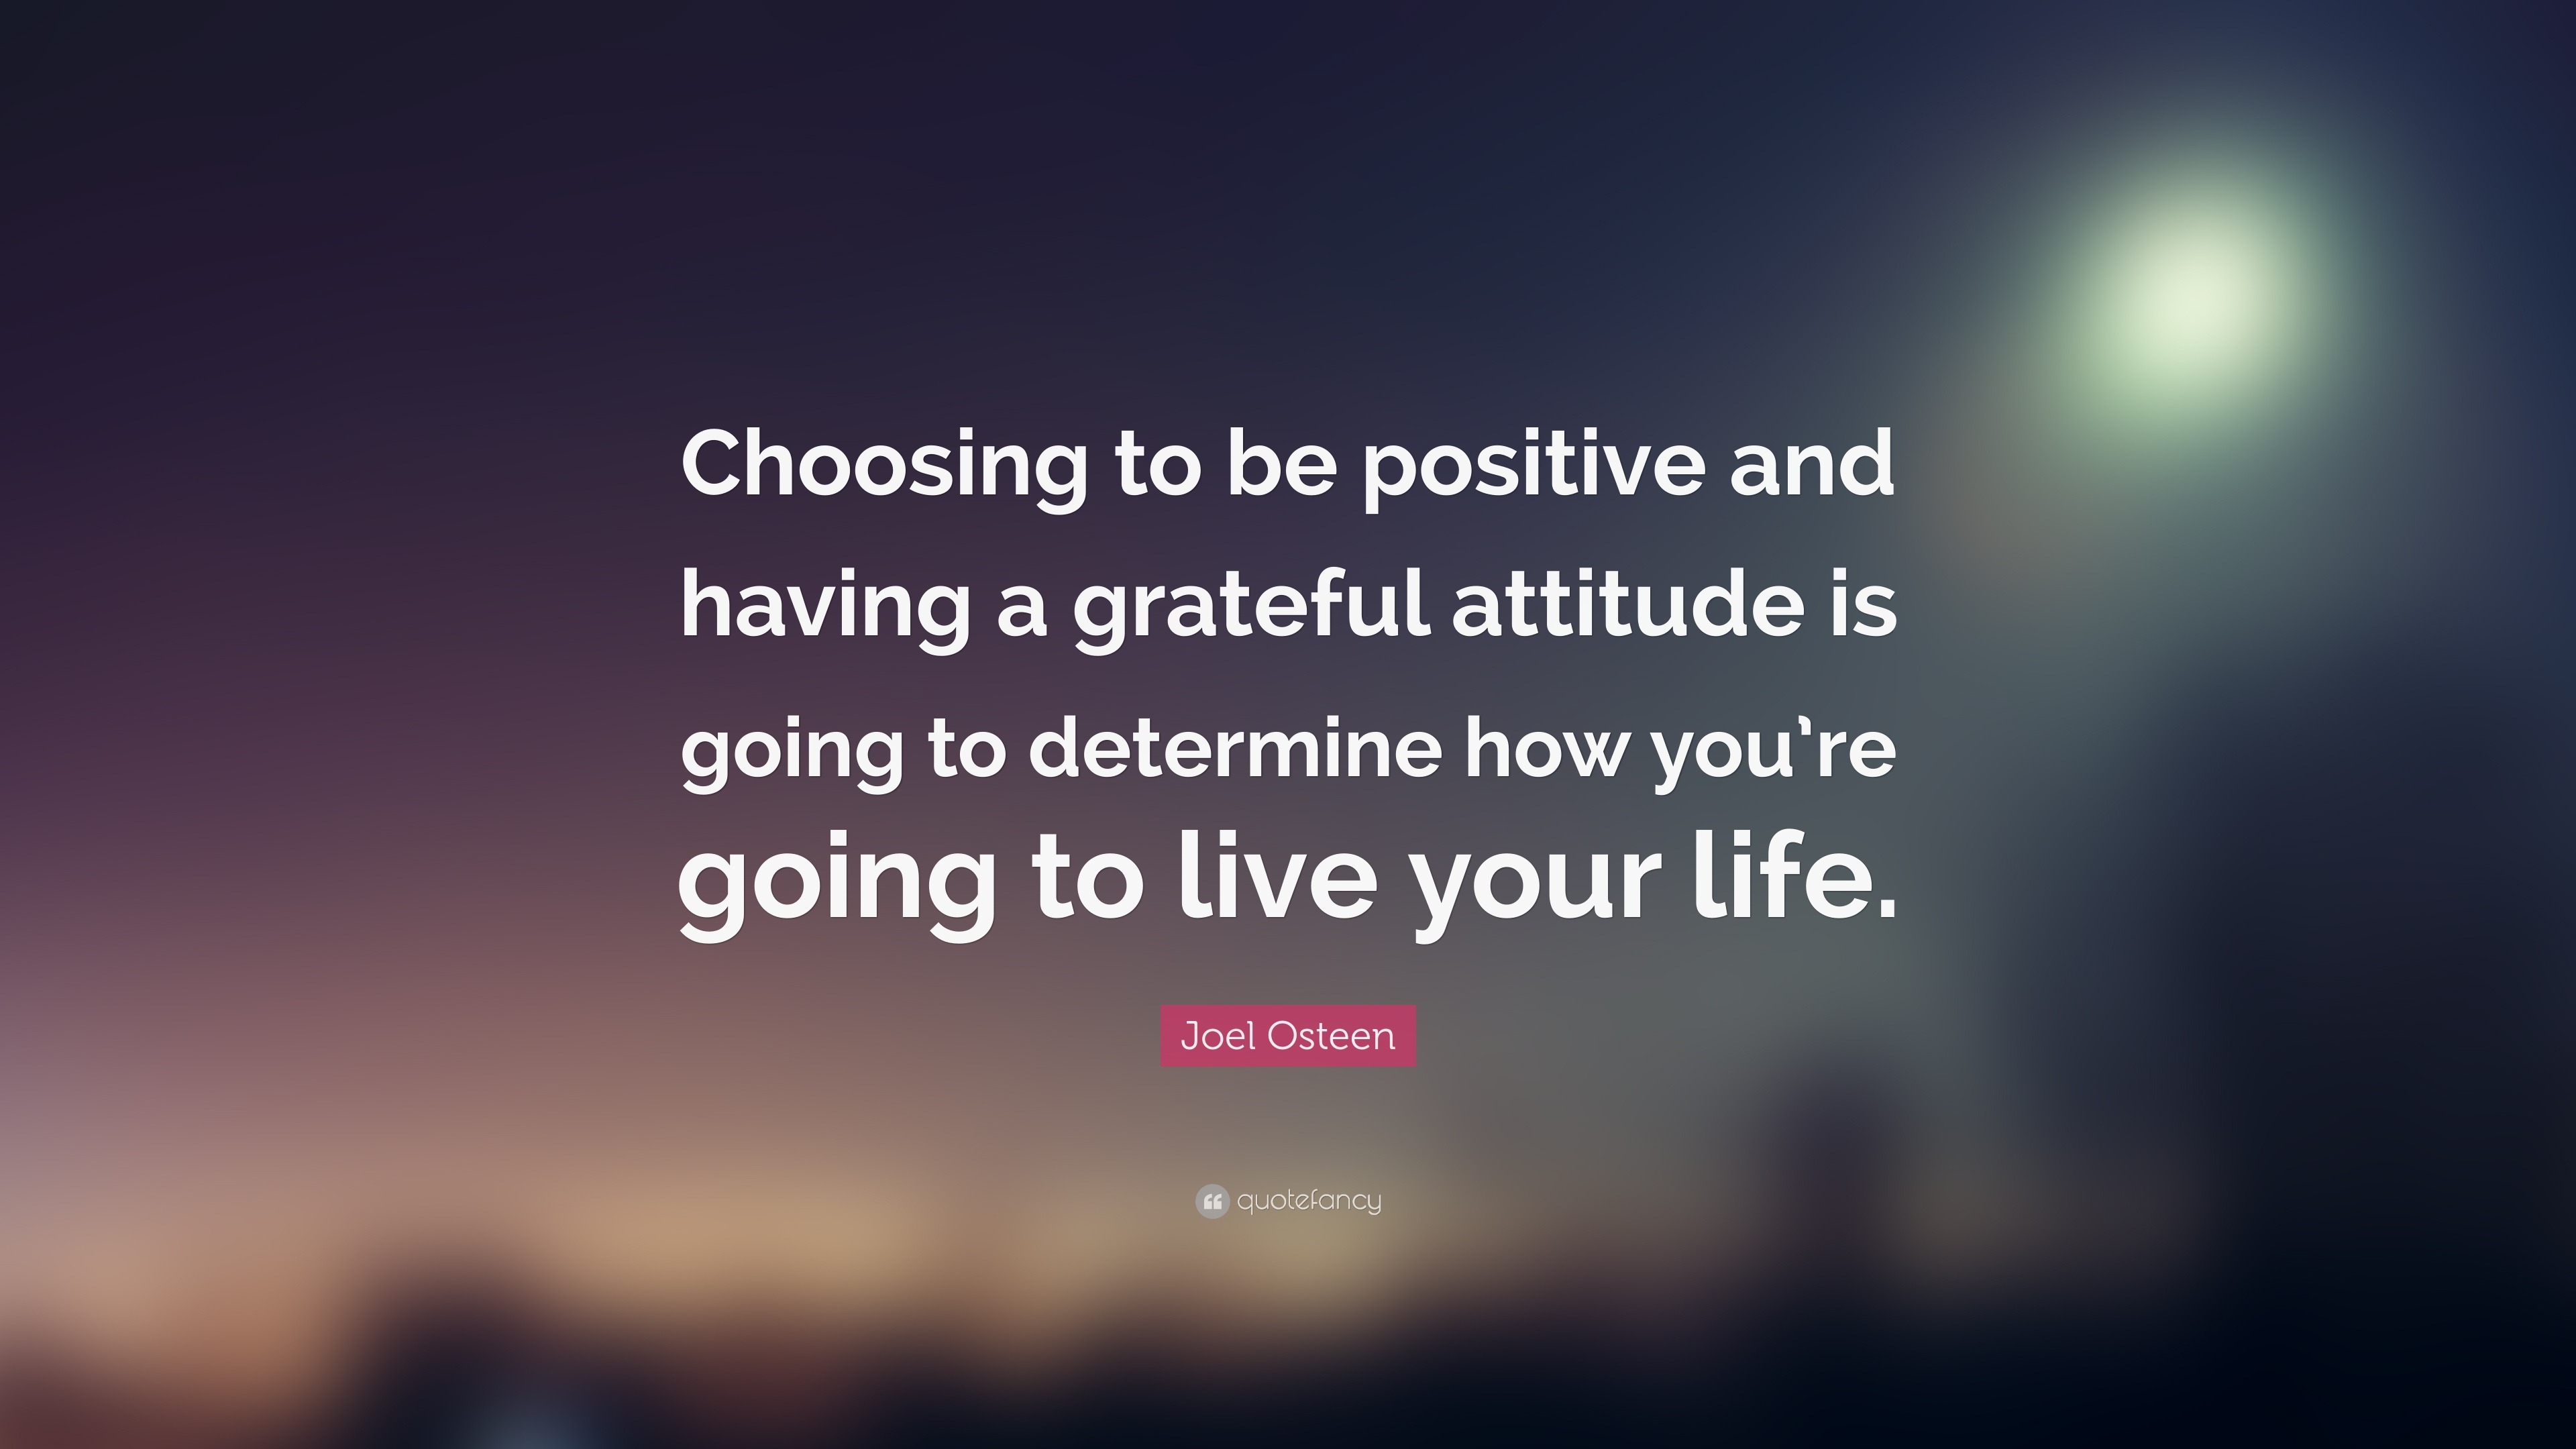 Joel Osteen Quote “Choosing to be positive and having a grateful attitude is going